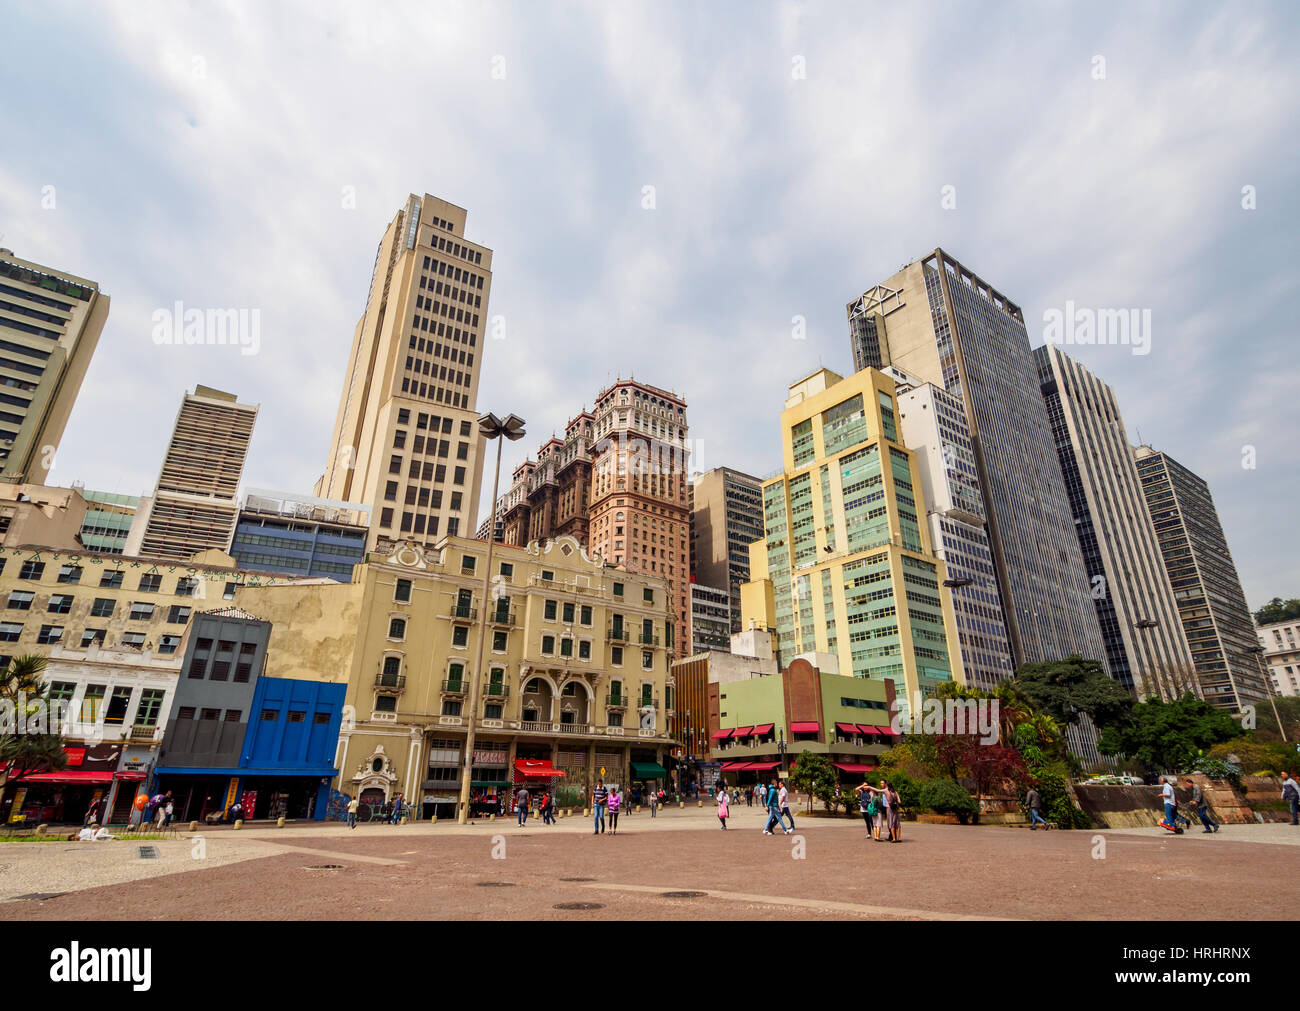 View of the high rise building in the city centre, City of Sao Paulo, State of Sao Paulo, Brazil Stock Photo